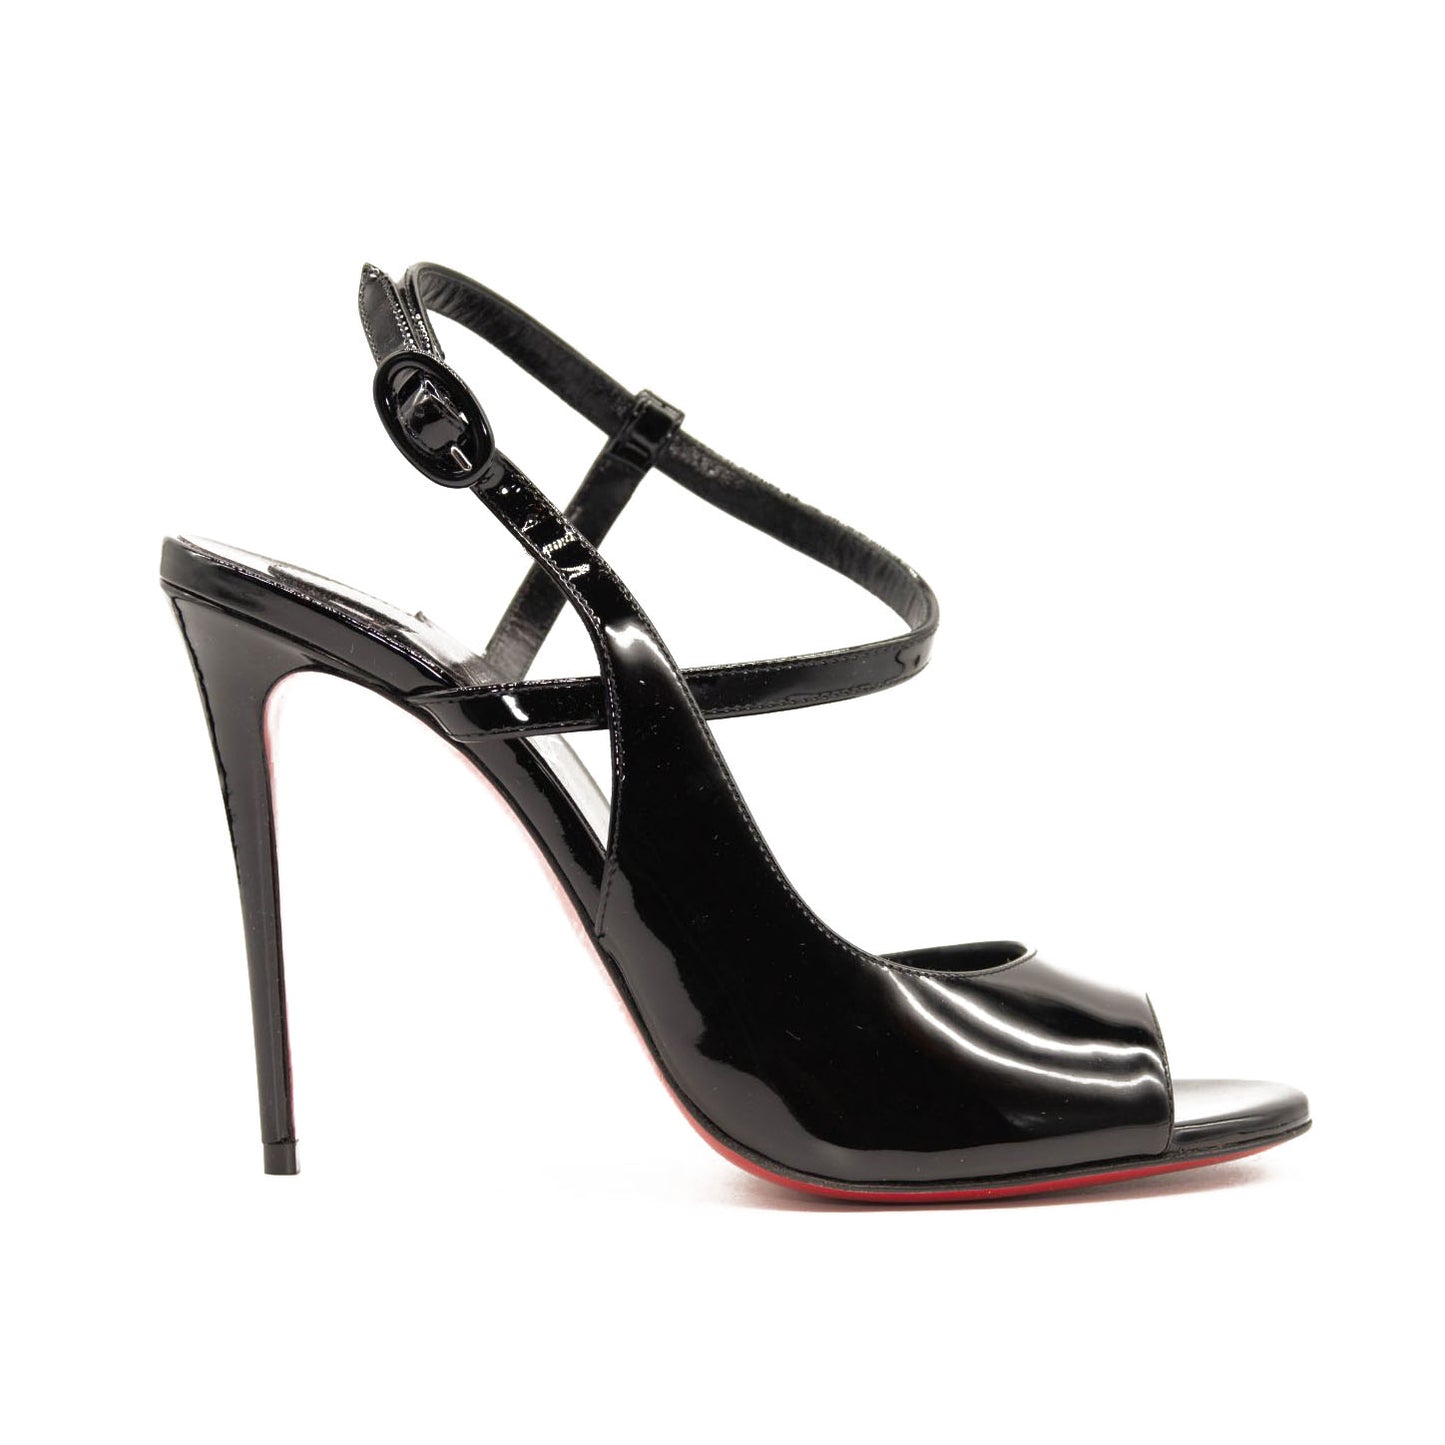 NEW $895 CHRISTIAN LOUBOUTIN Black Patent Leather So Jenlove D'orsay Sandals Size 37.5